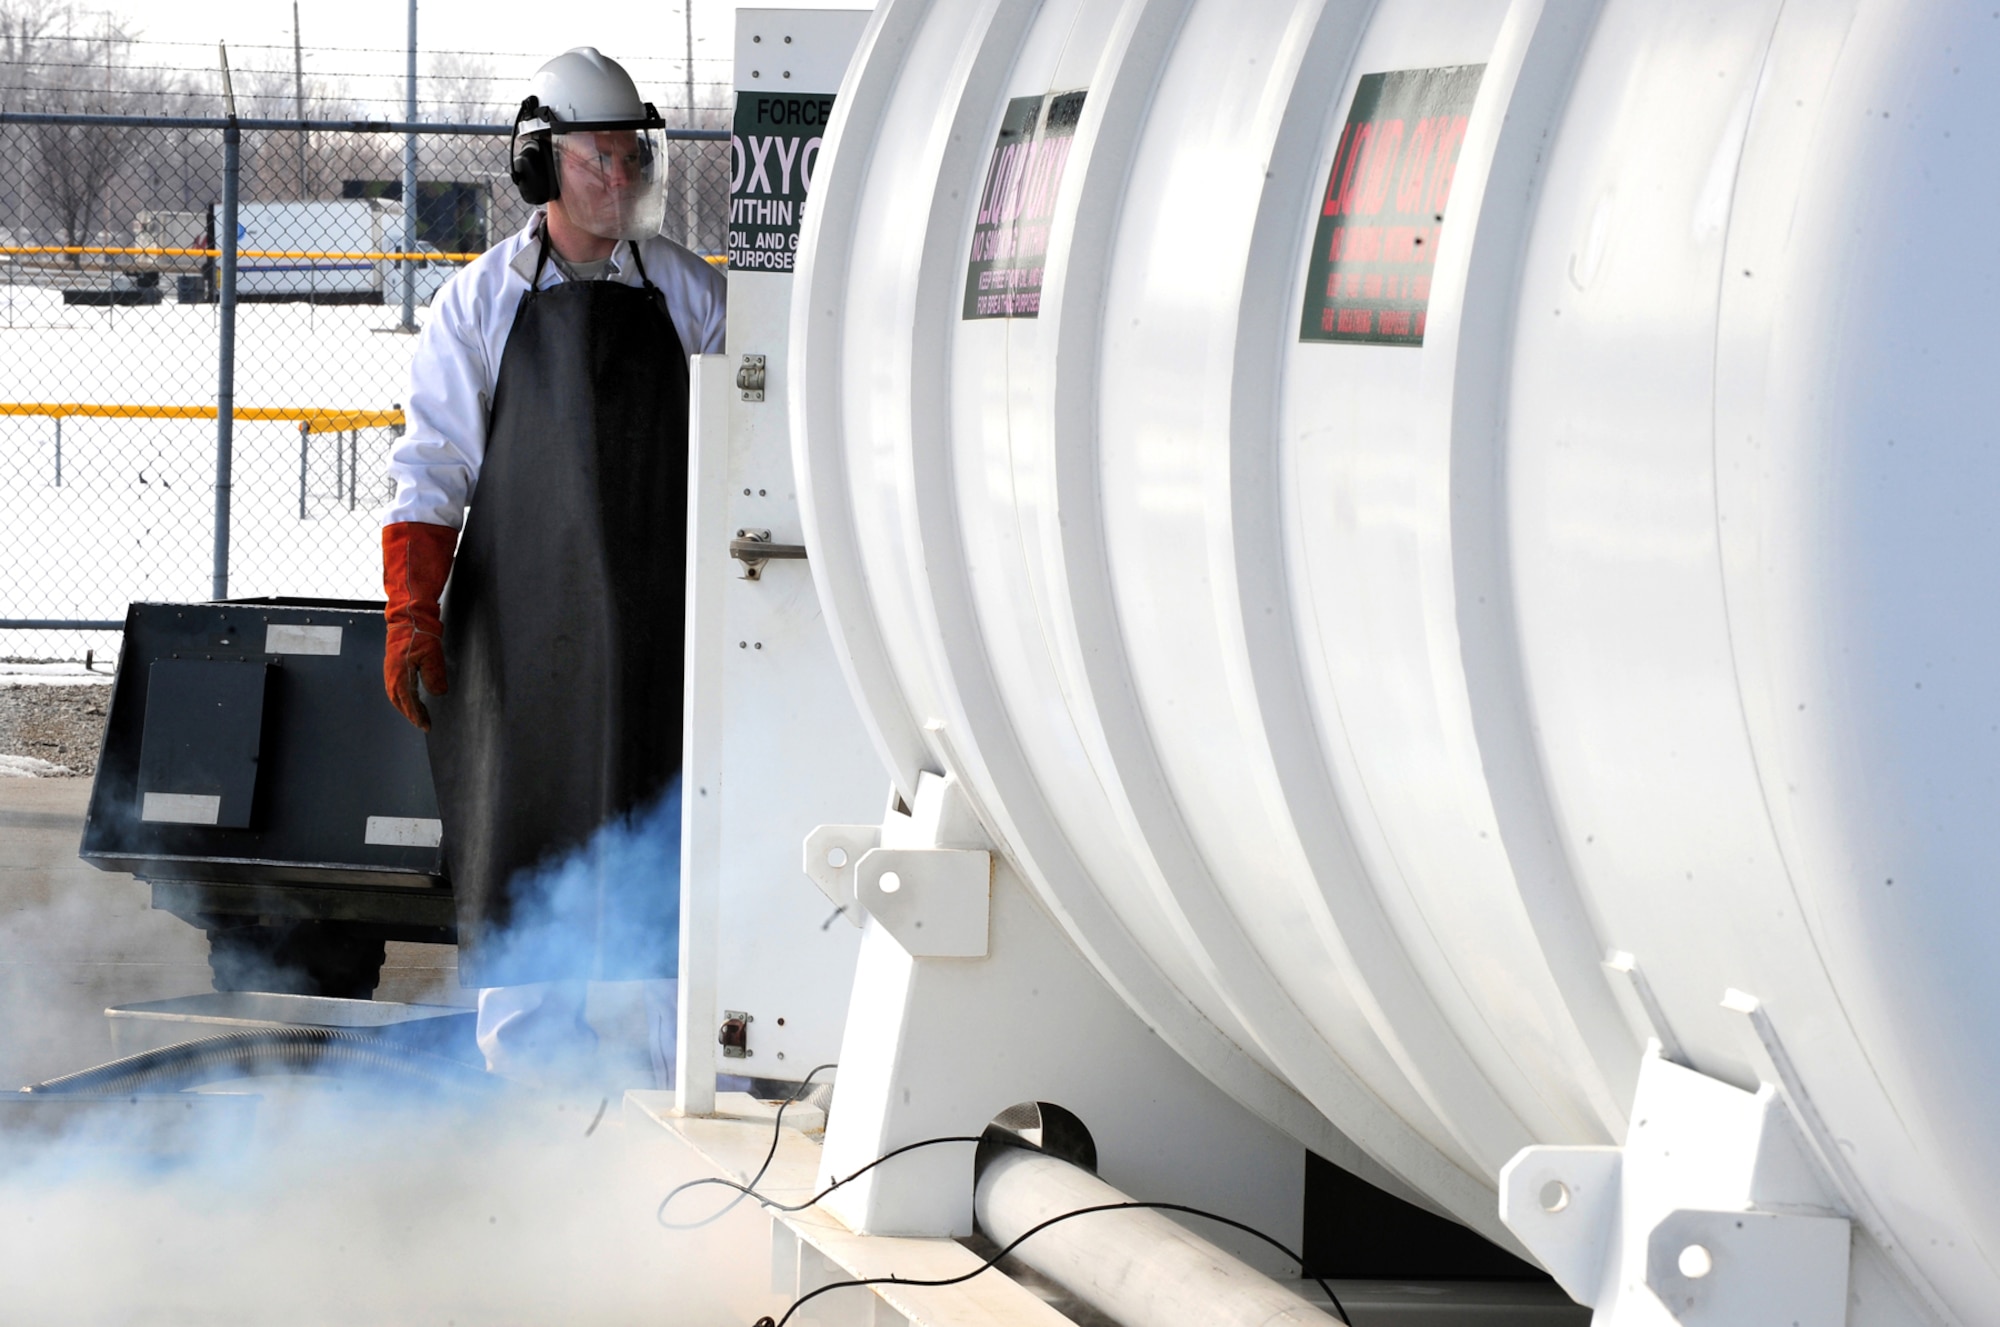 OFFUTT AIR FORCE BASE, Neb. - Senior Airman Nicholas Simon, a fuels facilities technician with the 55th Maintenance Squadron's Fuels Management Flight, purges a hose attached to a liquid oxygen tank in order to remove impurities prior to filling a portable oxygen cart here March 2. Airmen of the flight are responsible for the bulk storage and distribution of liquid oxygen, or LOX. U.S. Air Force photo by Josh Plueger
